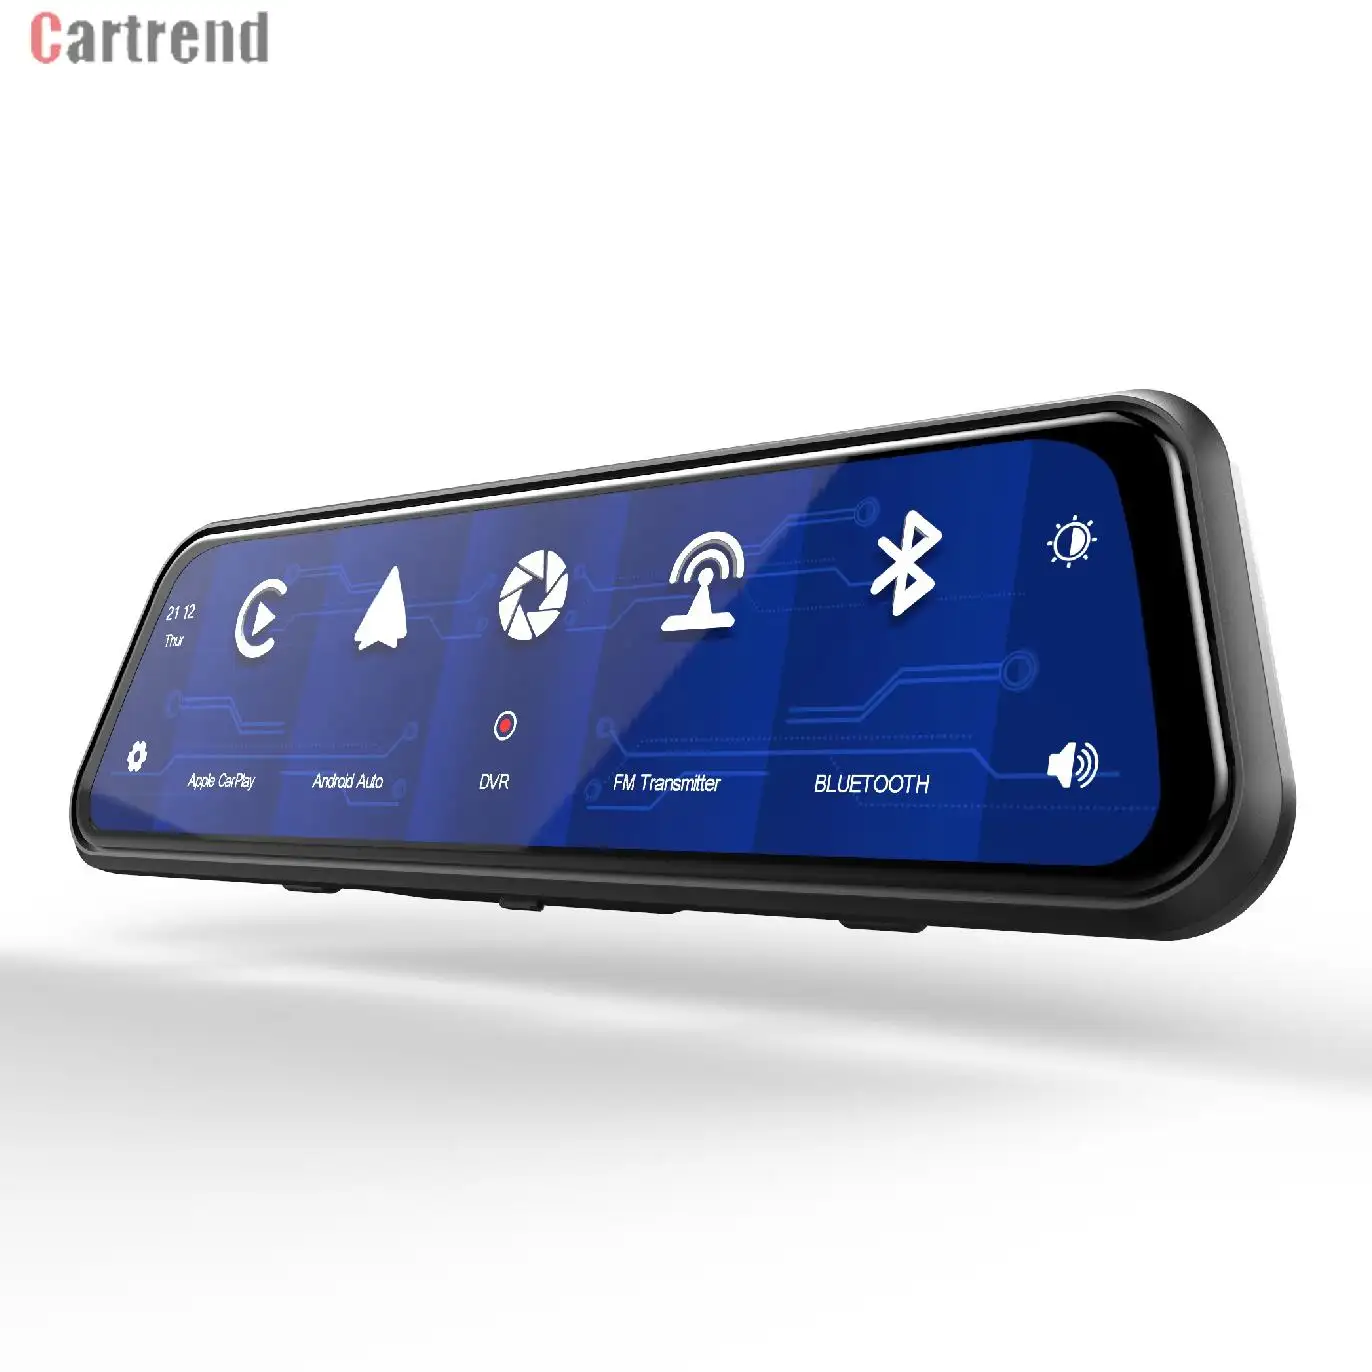 Cartrend Android 11 8core 8+128G Car Multimedia DVD Player For universal car host IPS DSP auto radio Built-in Carplay car radio